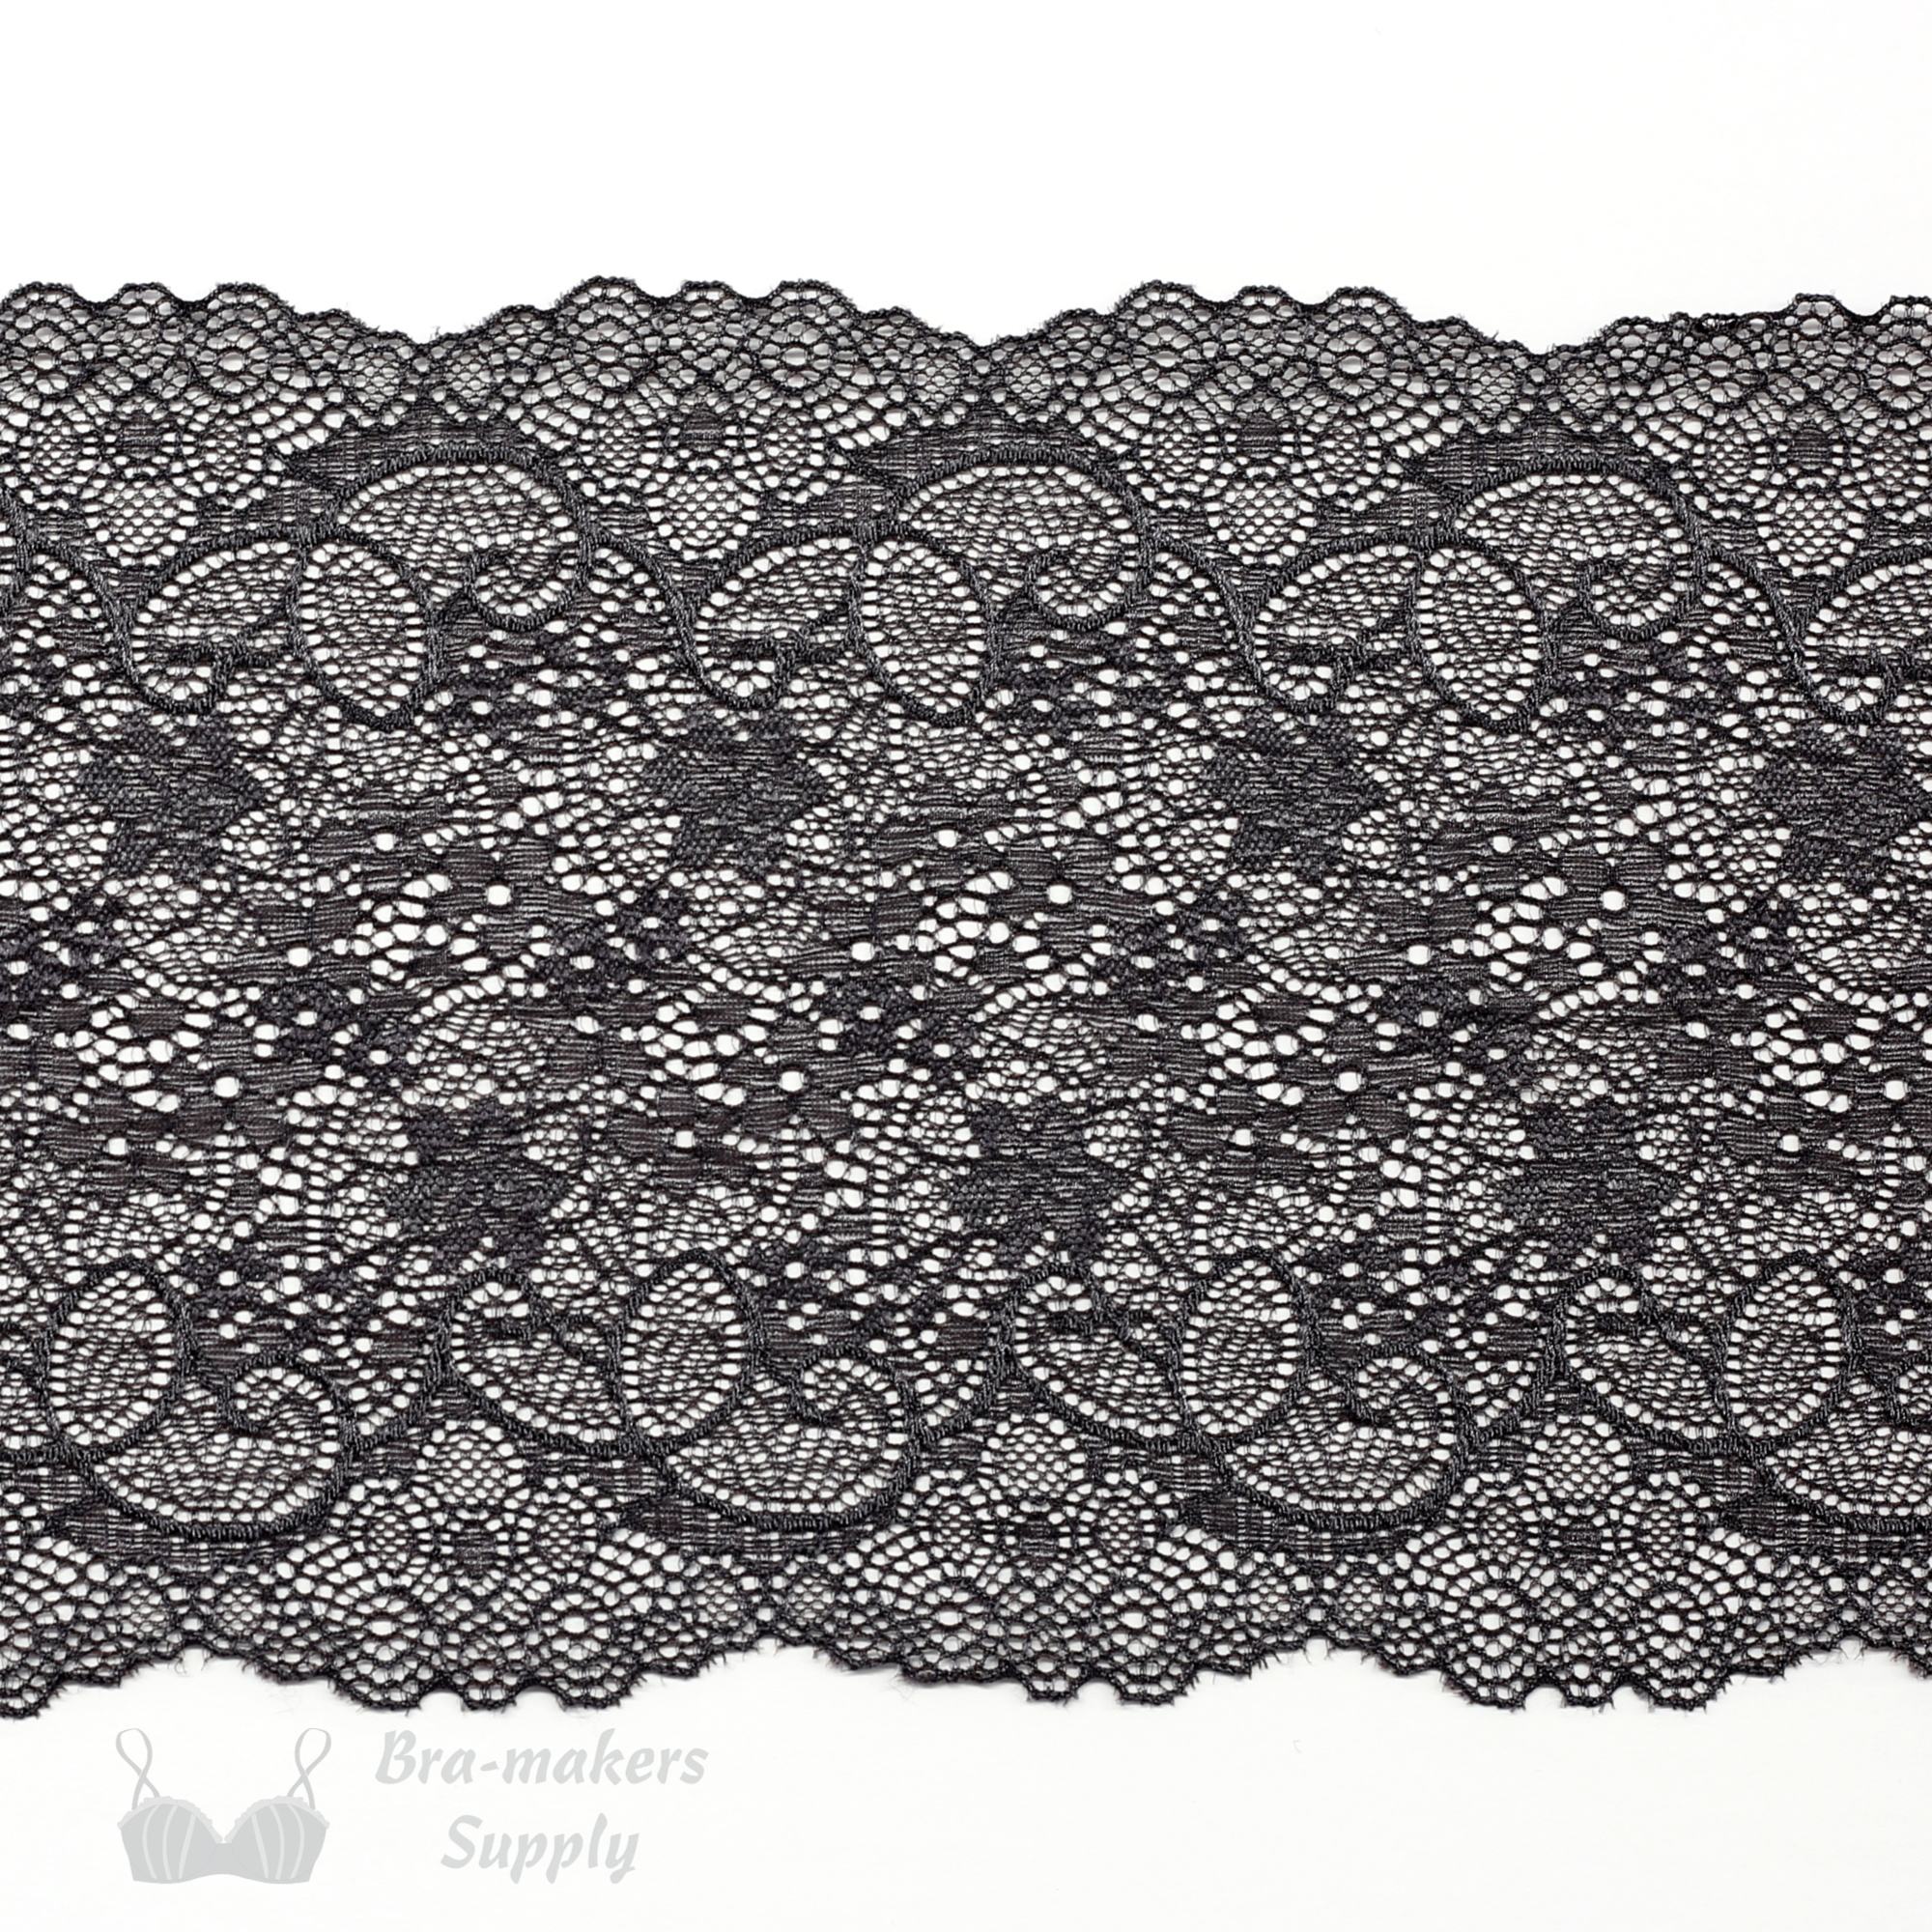 Six Inch Pewter Swirl Floral Stretch Lace - Bra-makers Supply